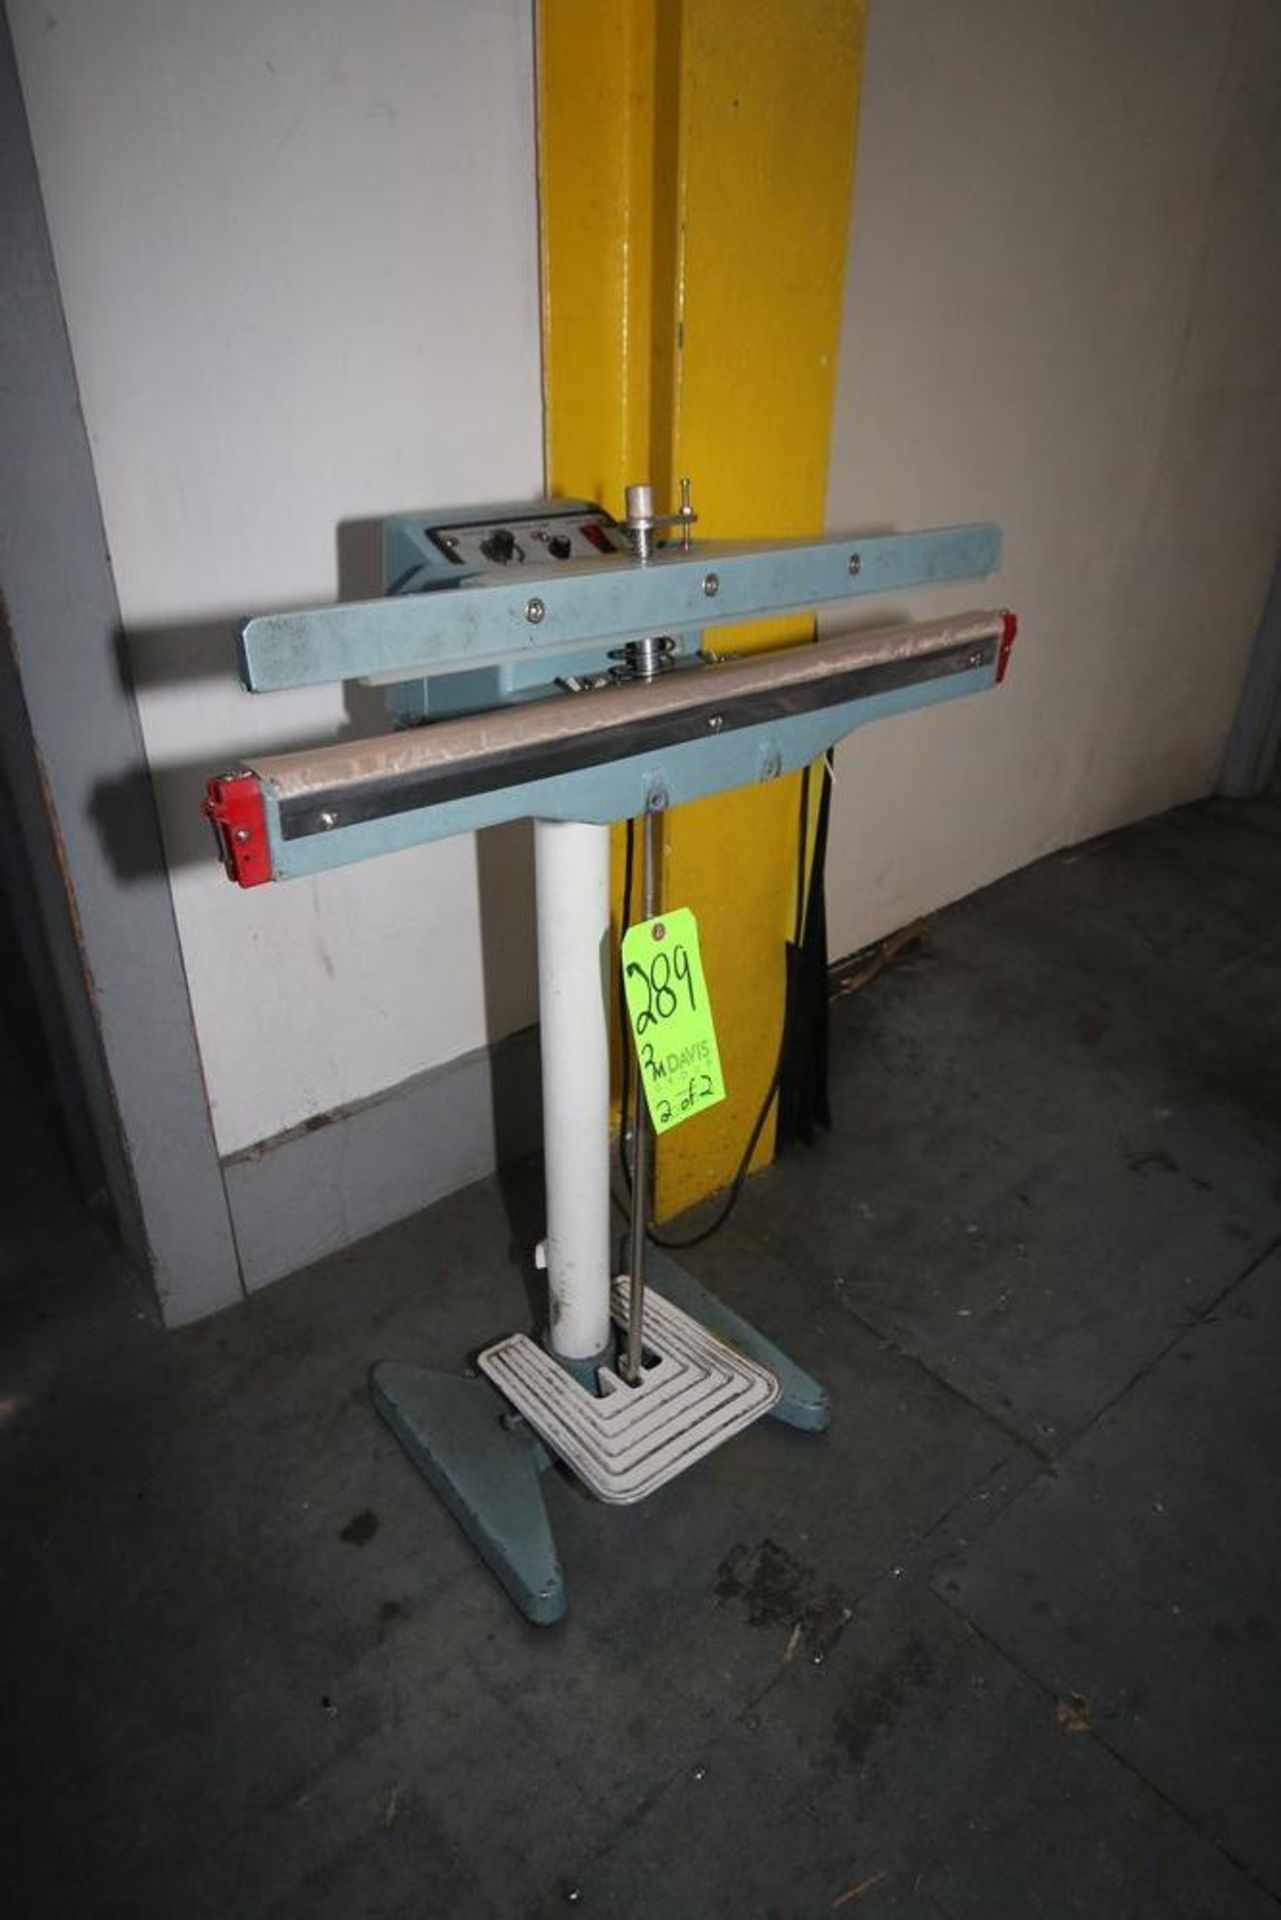 Midwest Pacific Bag Sealers, M/N MP24-F, with Aprox. 26" Sealing Area, with Foot Pedal Controls (